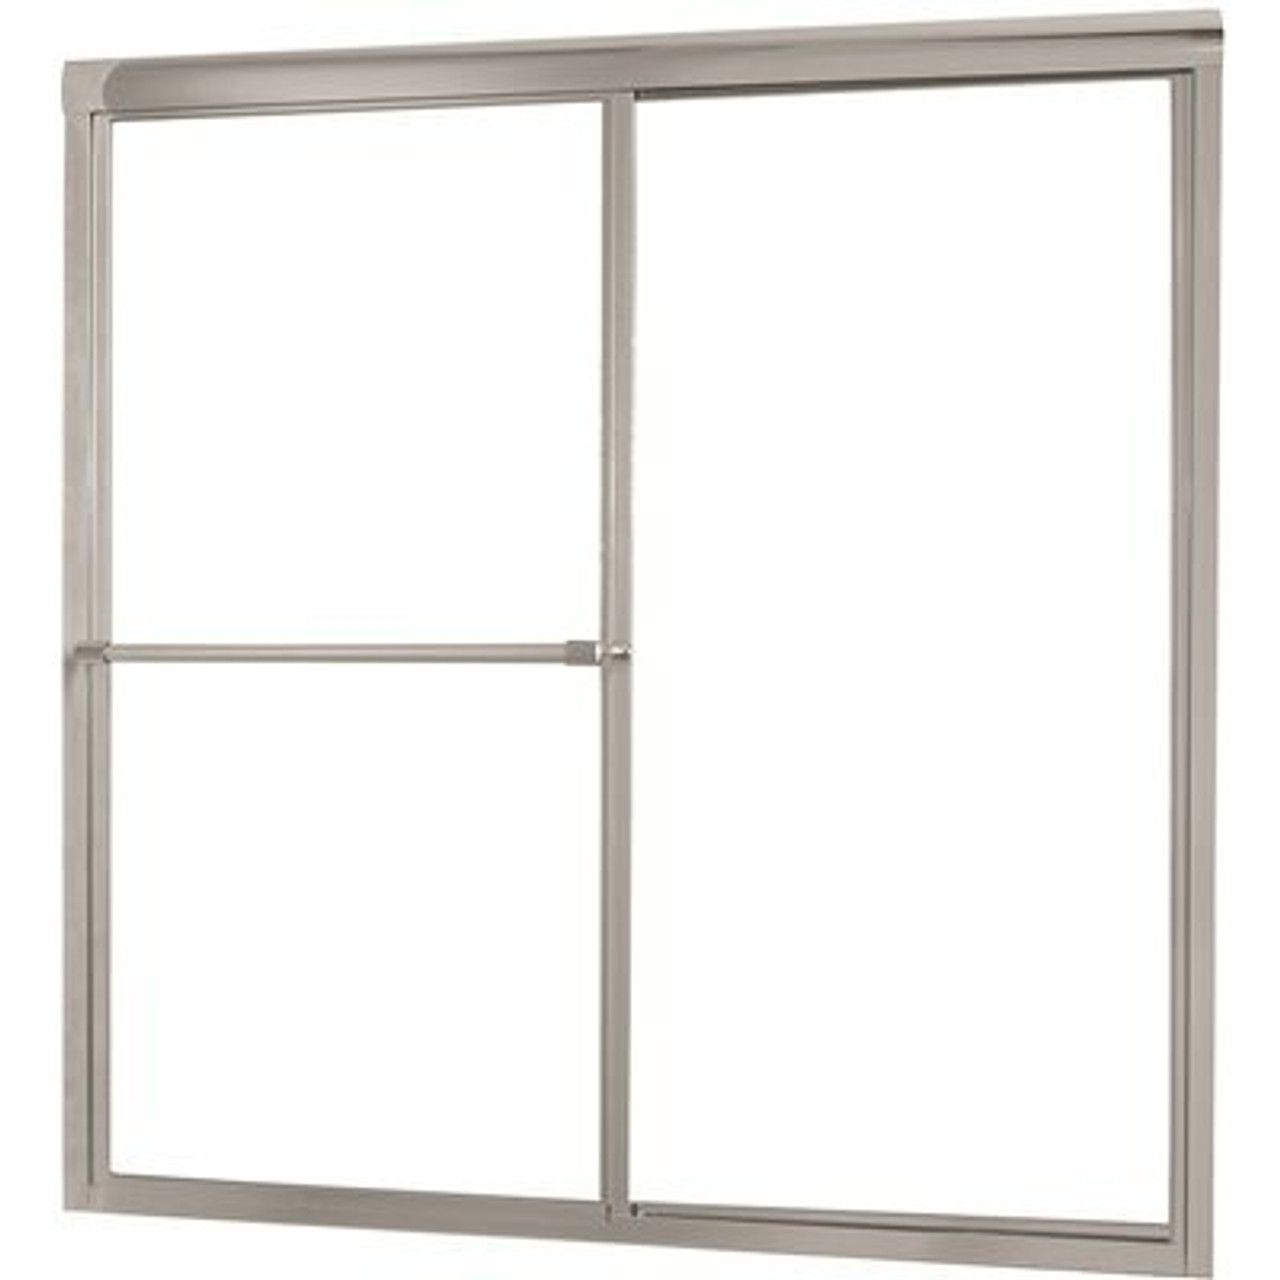 Foremost Tides 56 In. To 60 In. X 58 In. H Framed Sliding Tub Door In Silver With Rain Glass